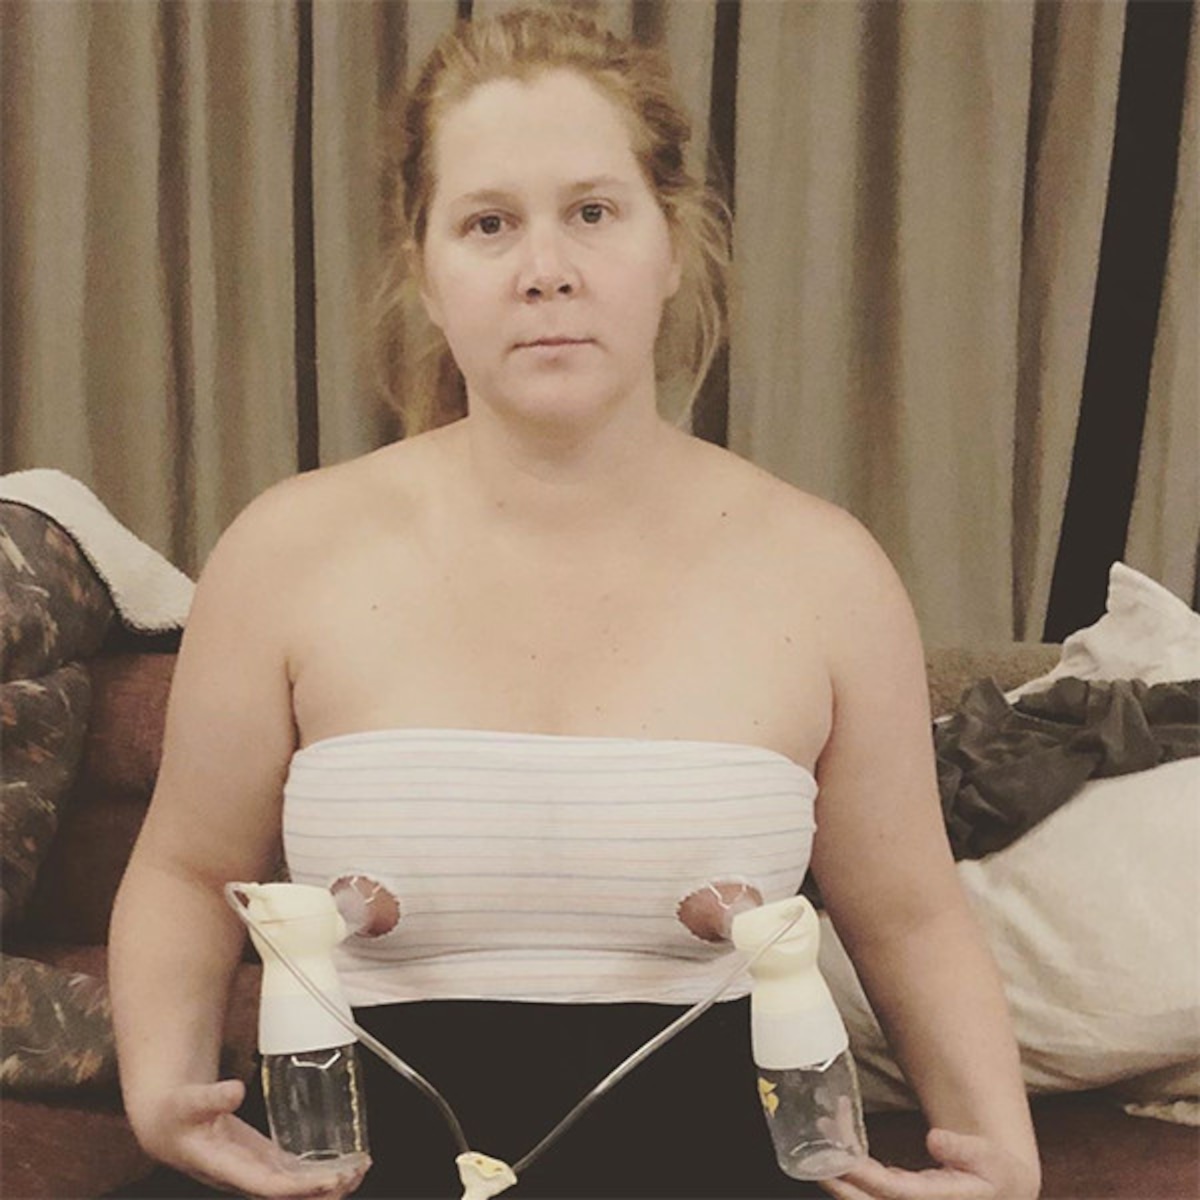 Nudes amy schumer See Amy